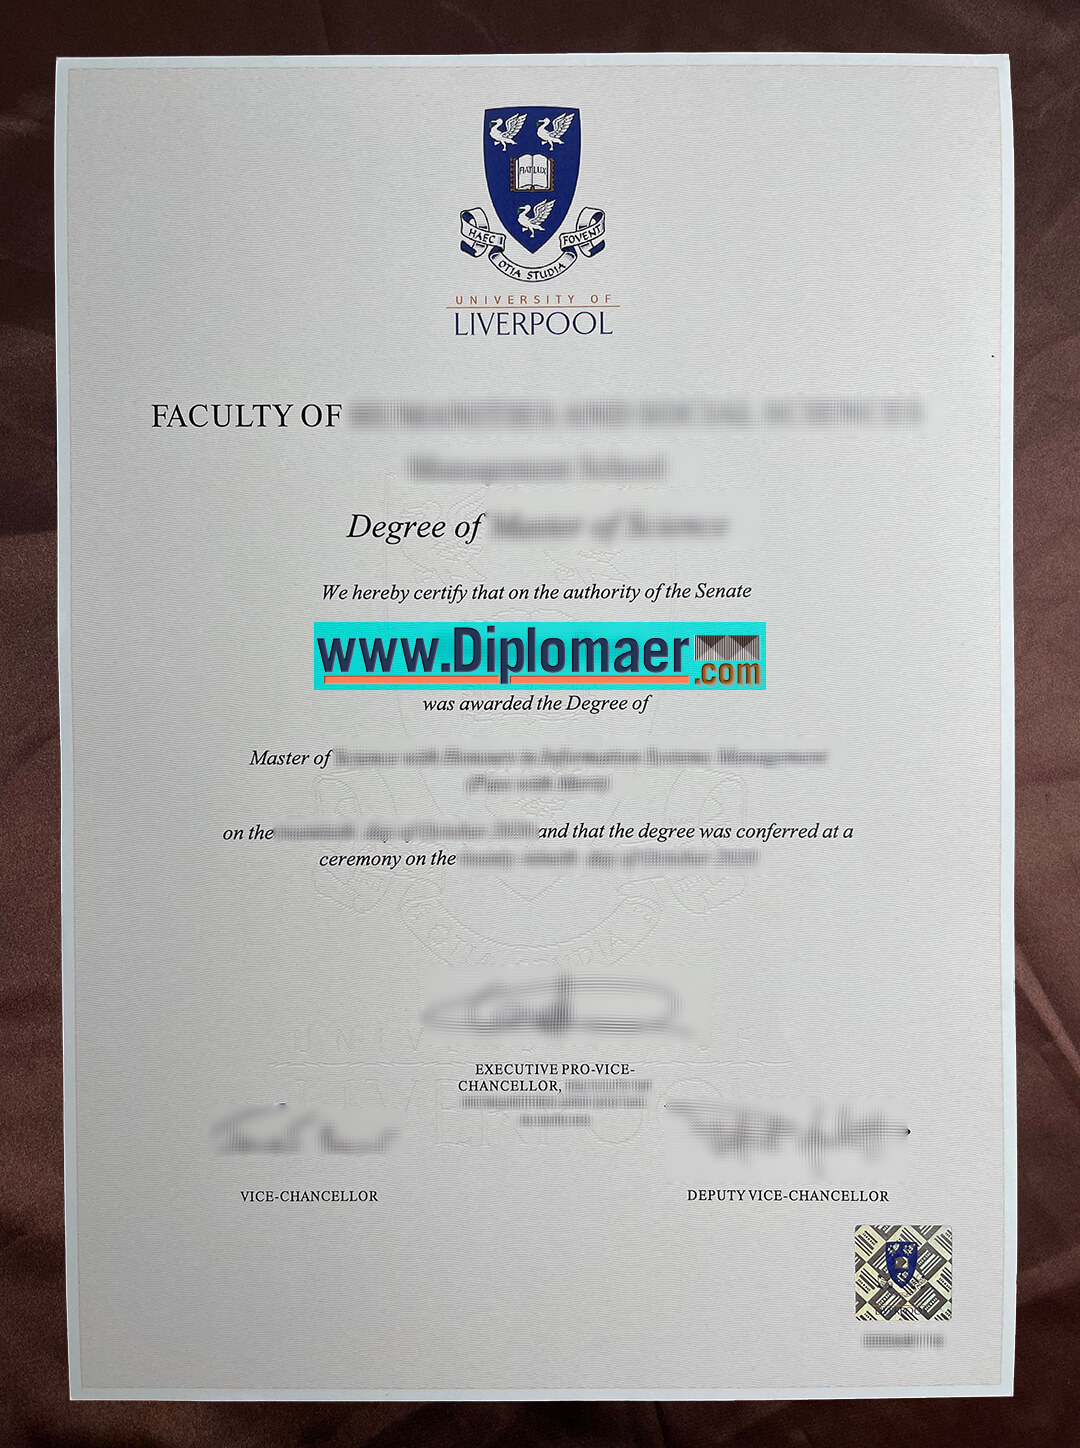 University of Liverpool Fake Diploma - How to get a fake University of Liverpool certificate?